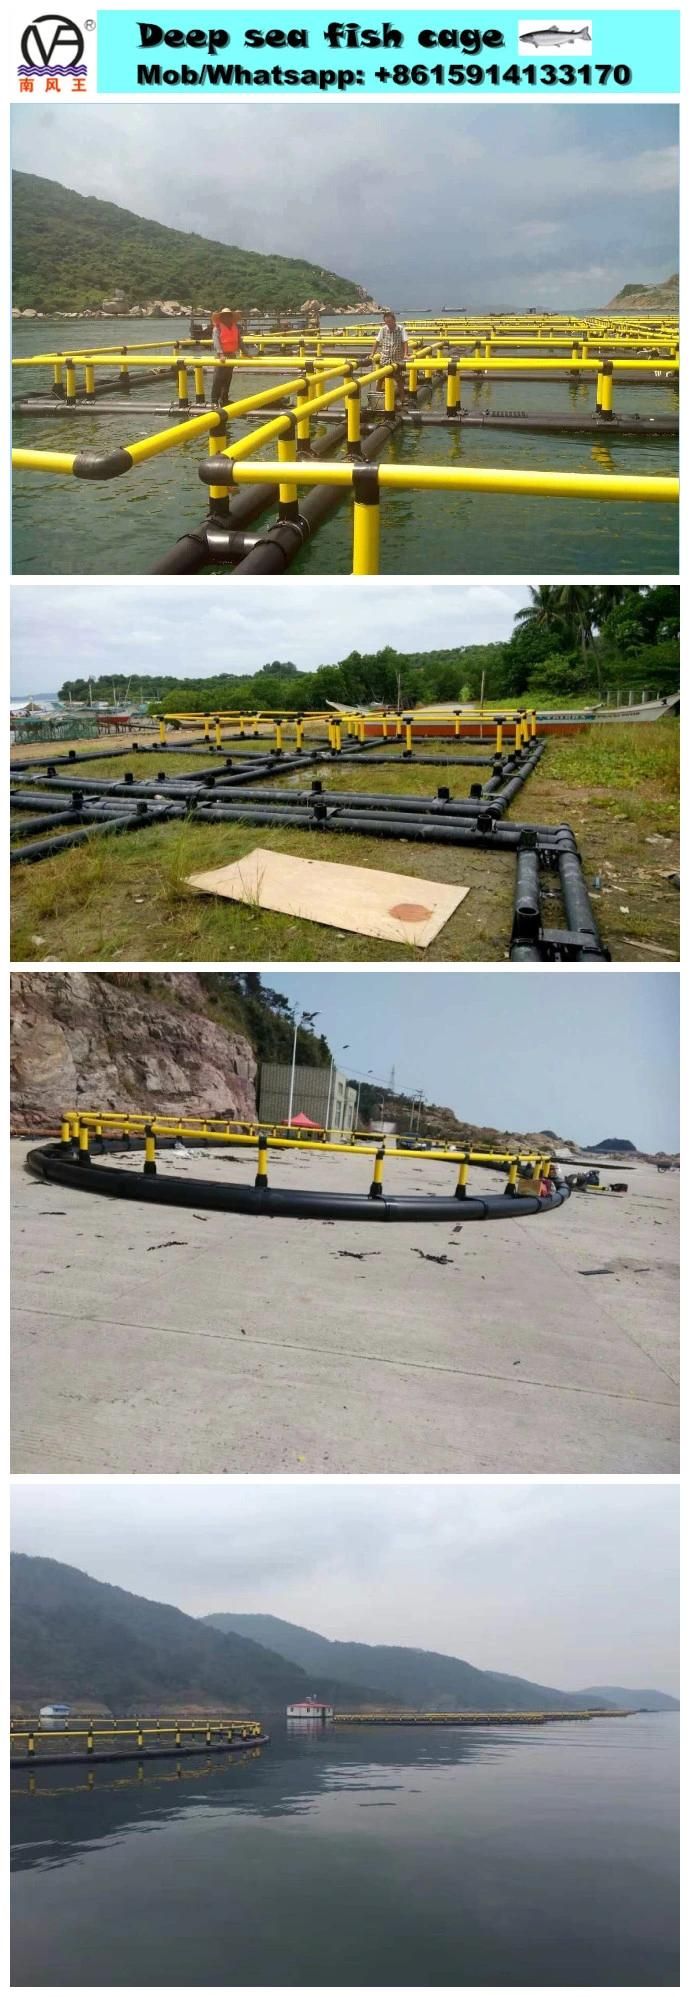 HDPE Floating Deep Sea Offshore Cages Fish Farm for Pond Lake and Ocean to Breed Tilapia